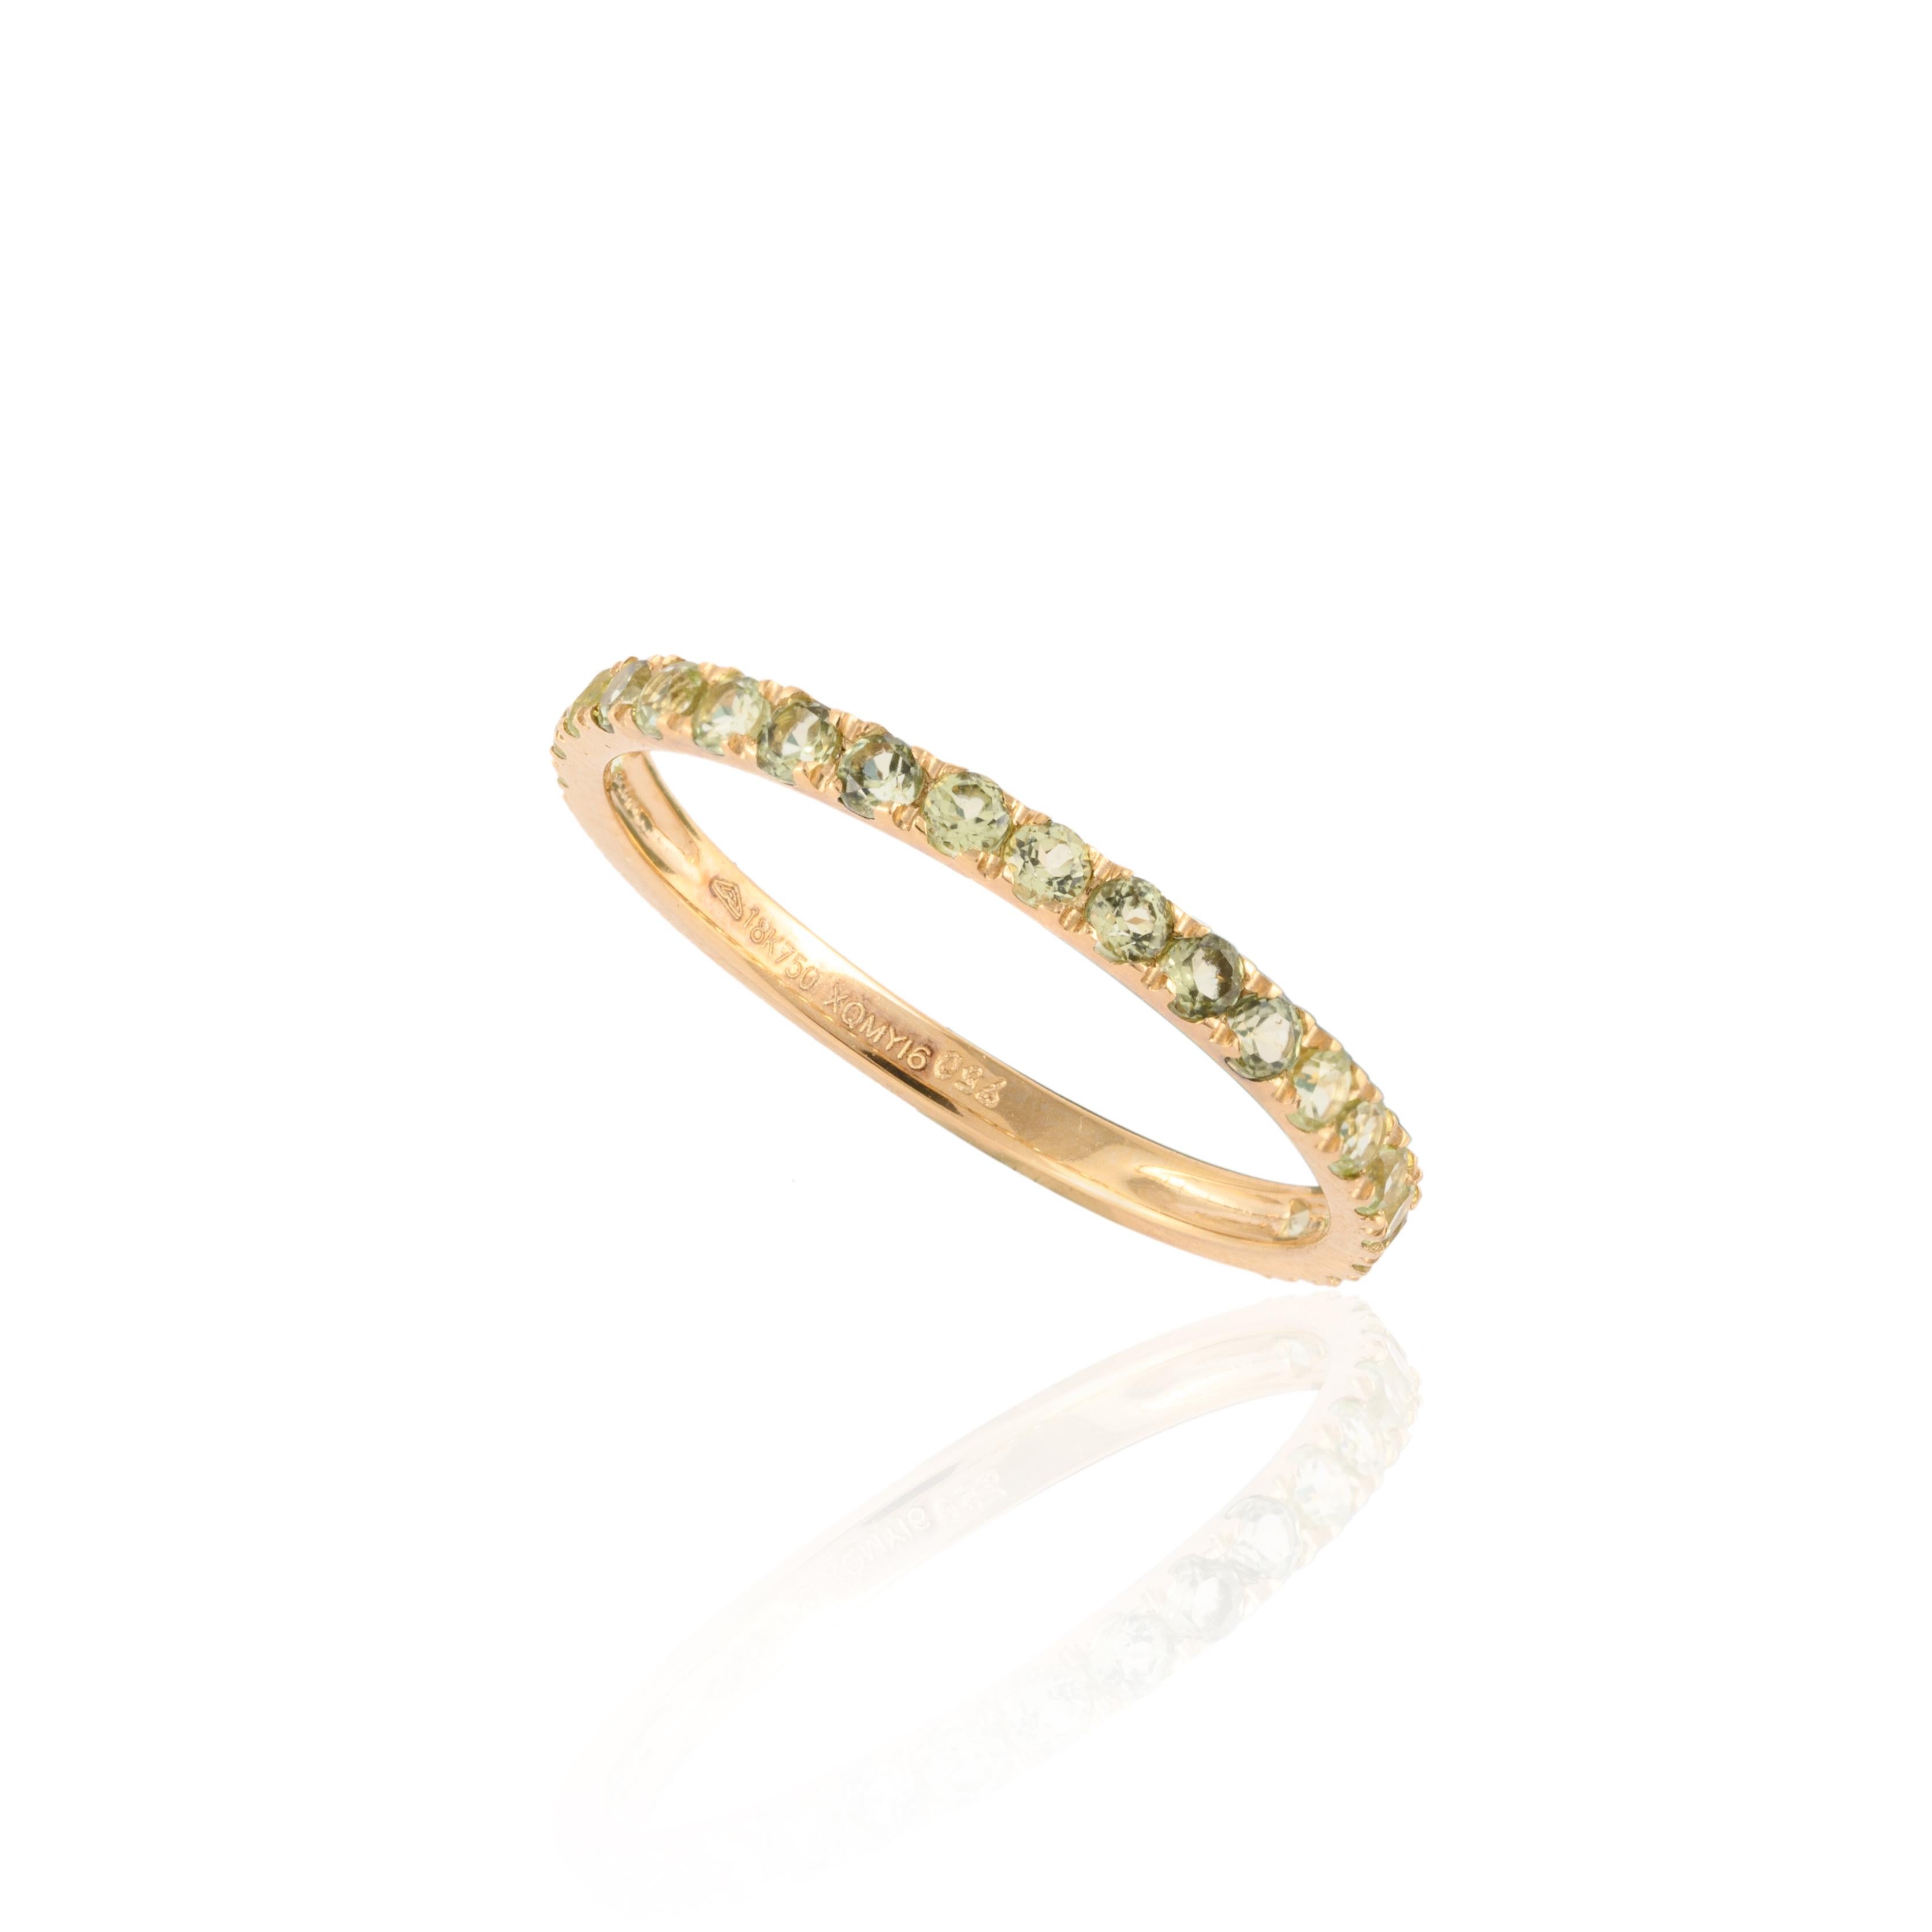 For Sale:  Peridot Pave Eternity Band, Stackable Peridot Band Ring 14k Solid Yellow Gold 8